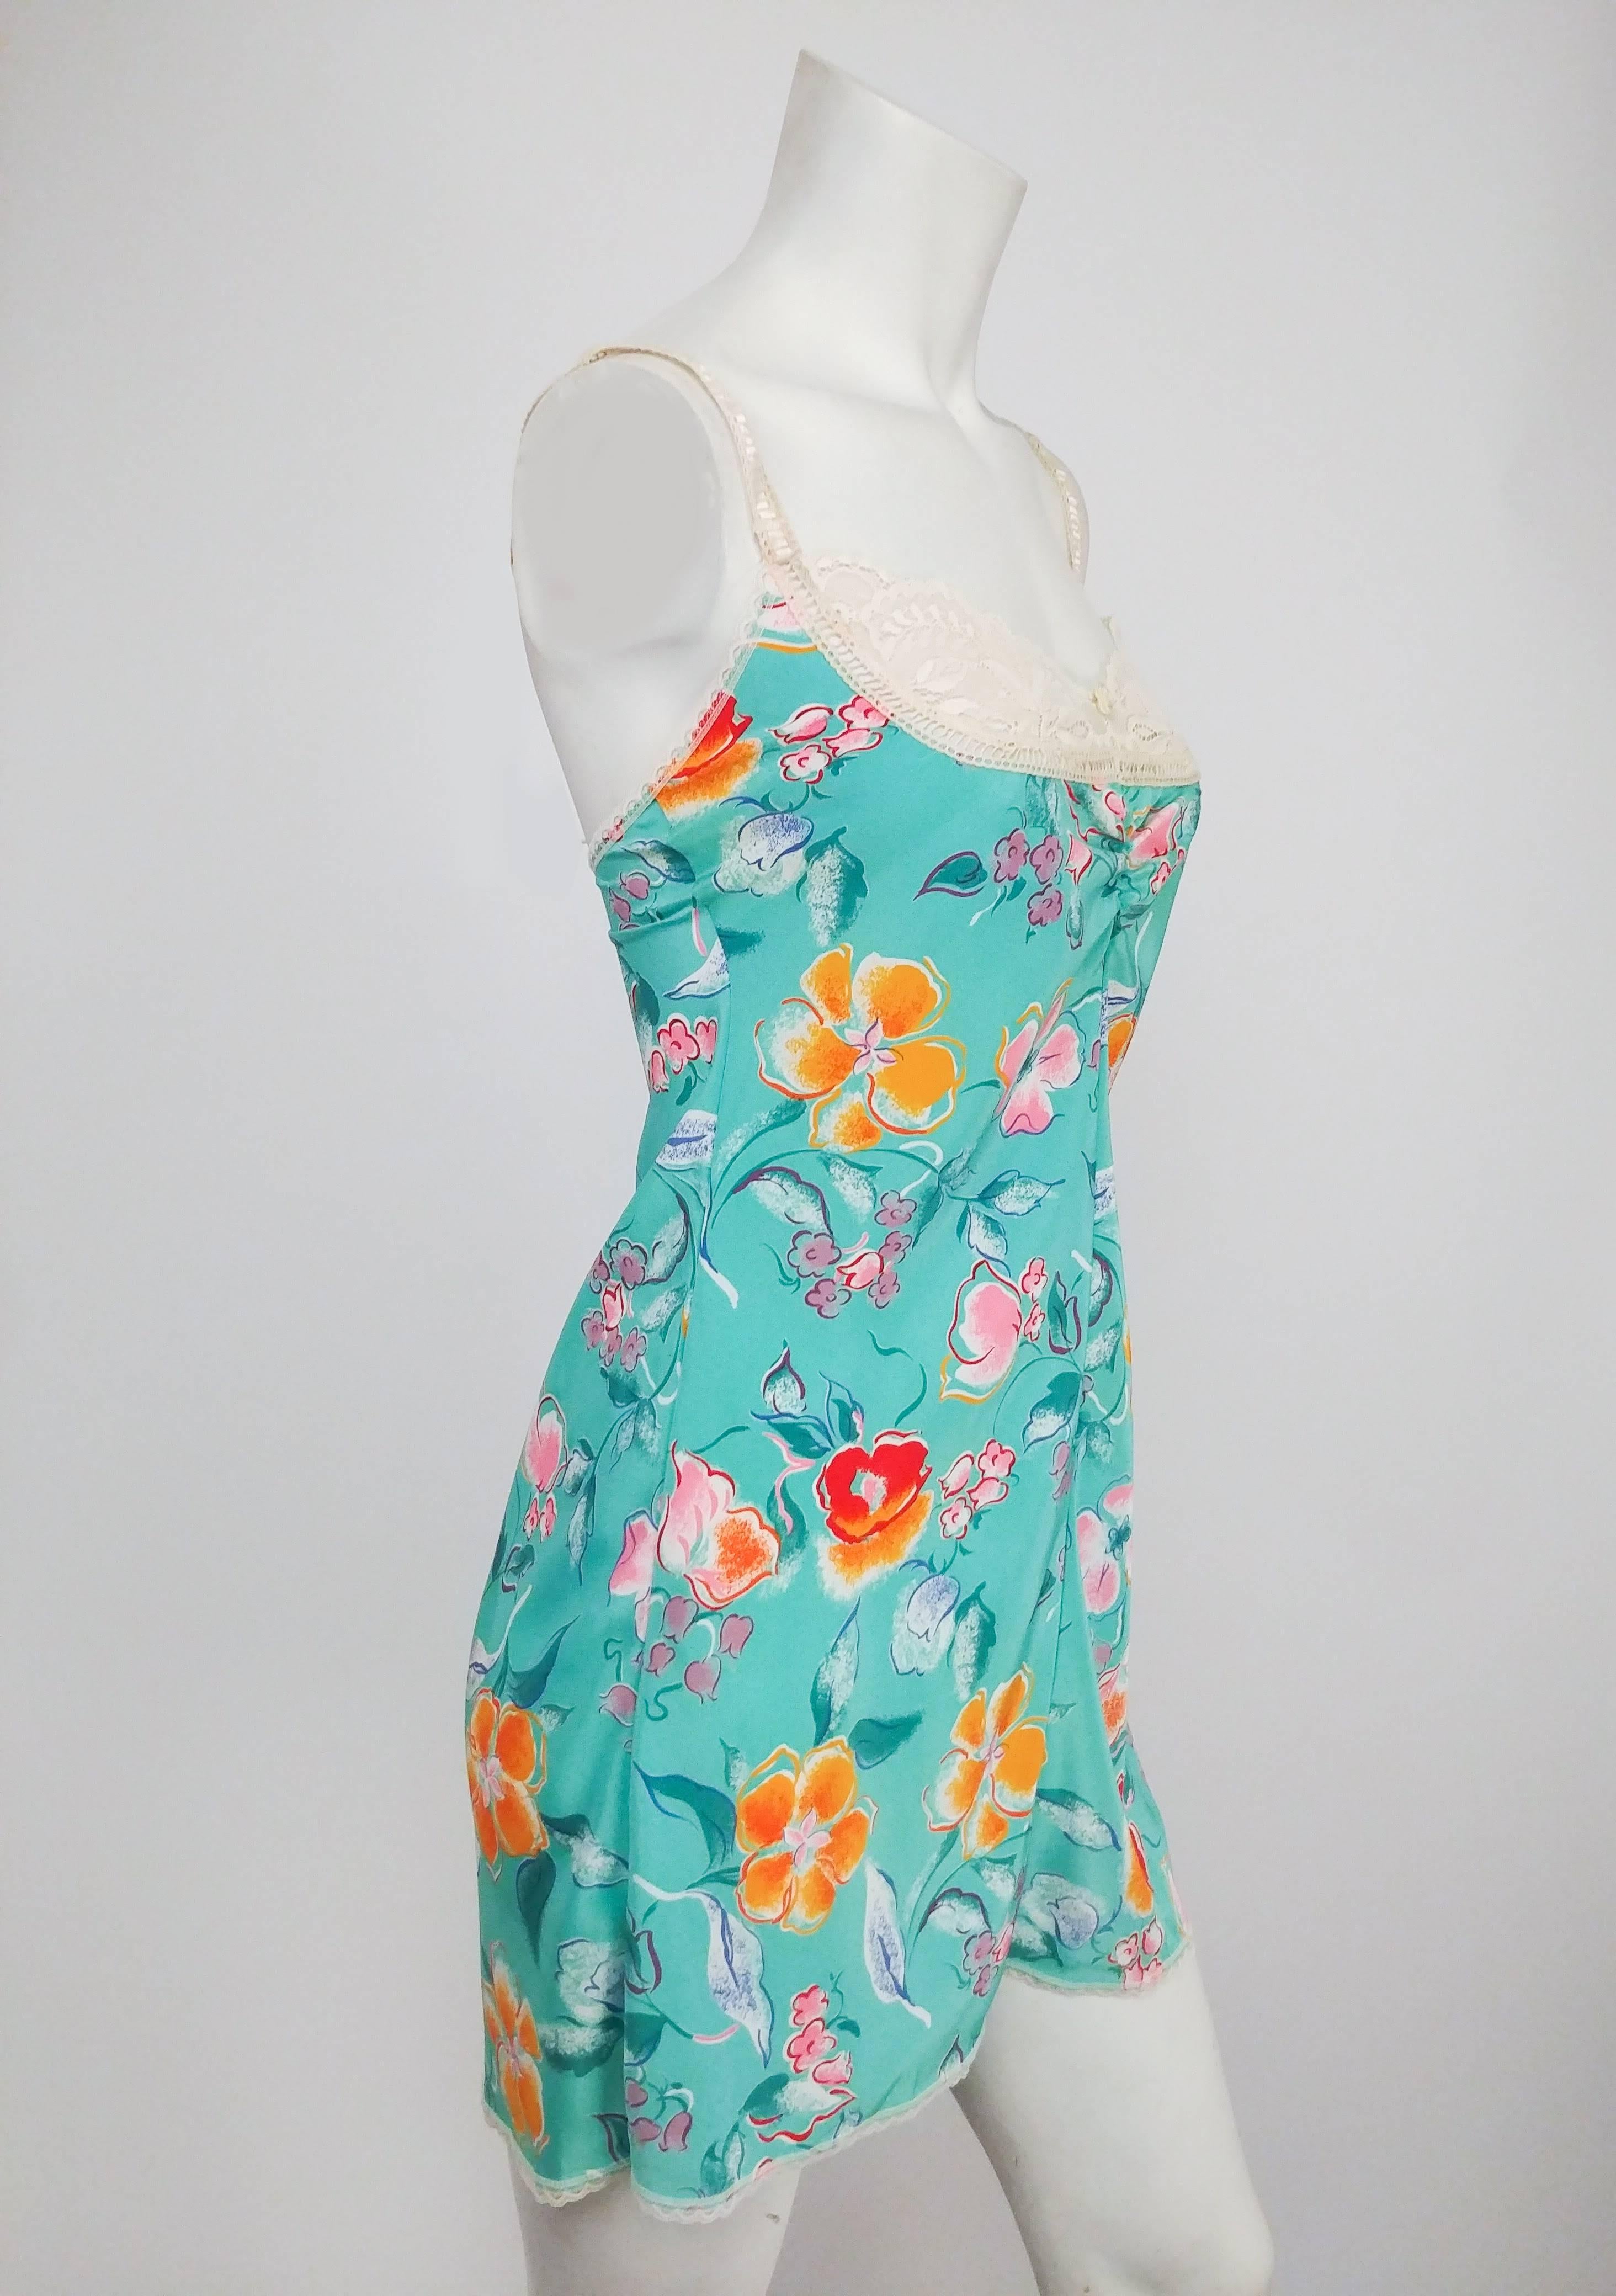 1980s Ungaro Seafoam Green Tropical Print Slip. Lace trim sweetheart neckline and ruched front bust. Lace adjustable straps. 